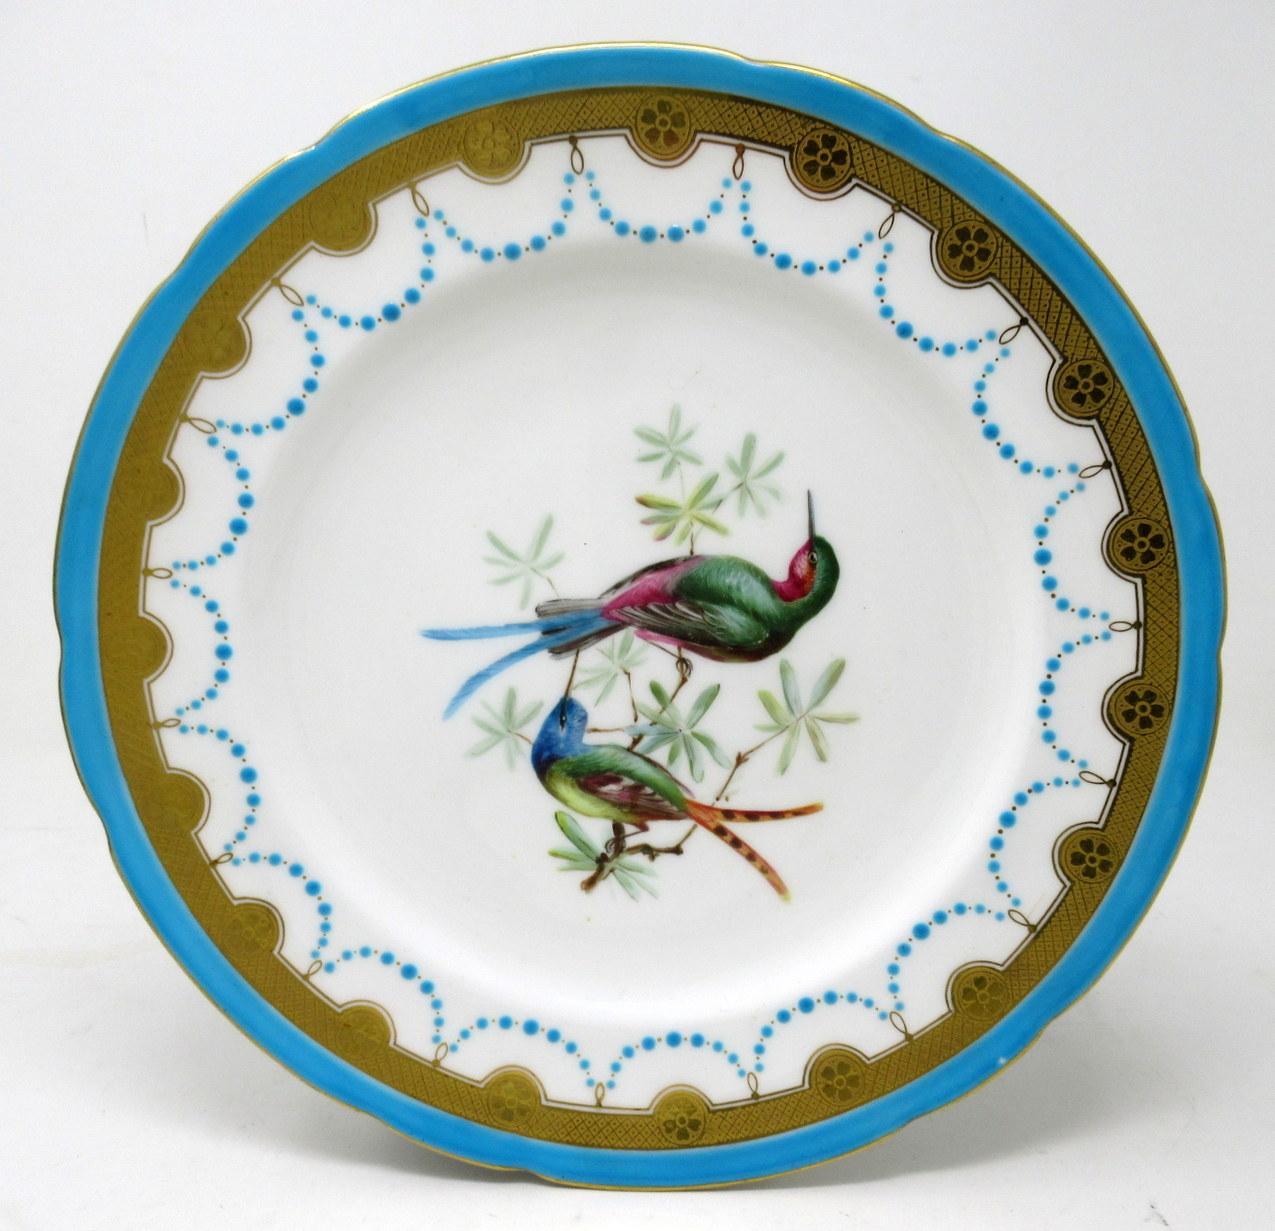 Stunning Example of an English Minton Porcelain hand painted cabinet plate of circular form of outstanding quality. 

The central reserve exquisitely hand painted depicting two colourful exotic Birds perched in branches, within a turquoise blue